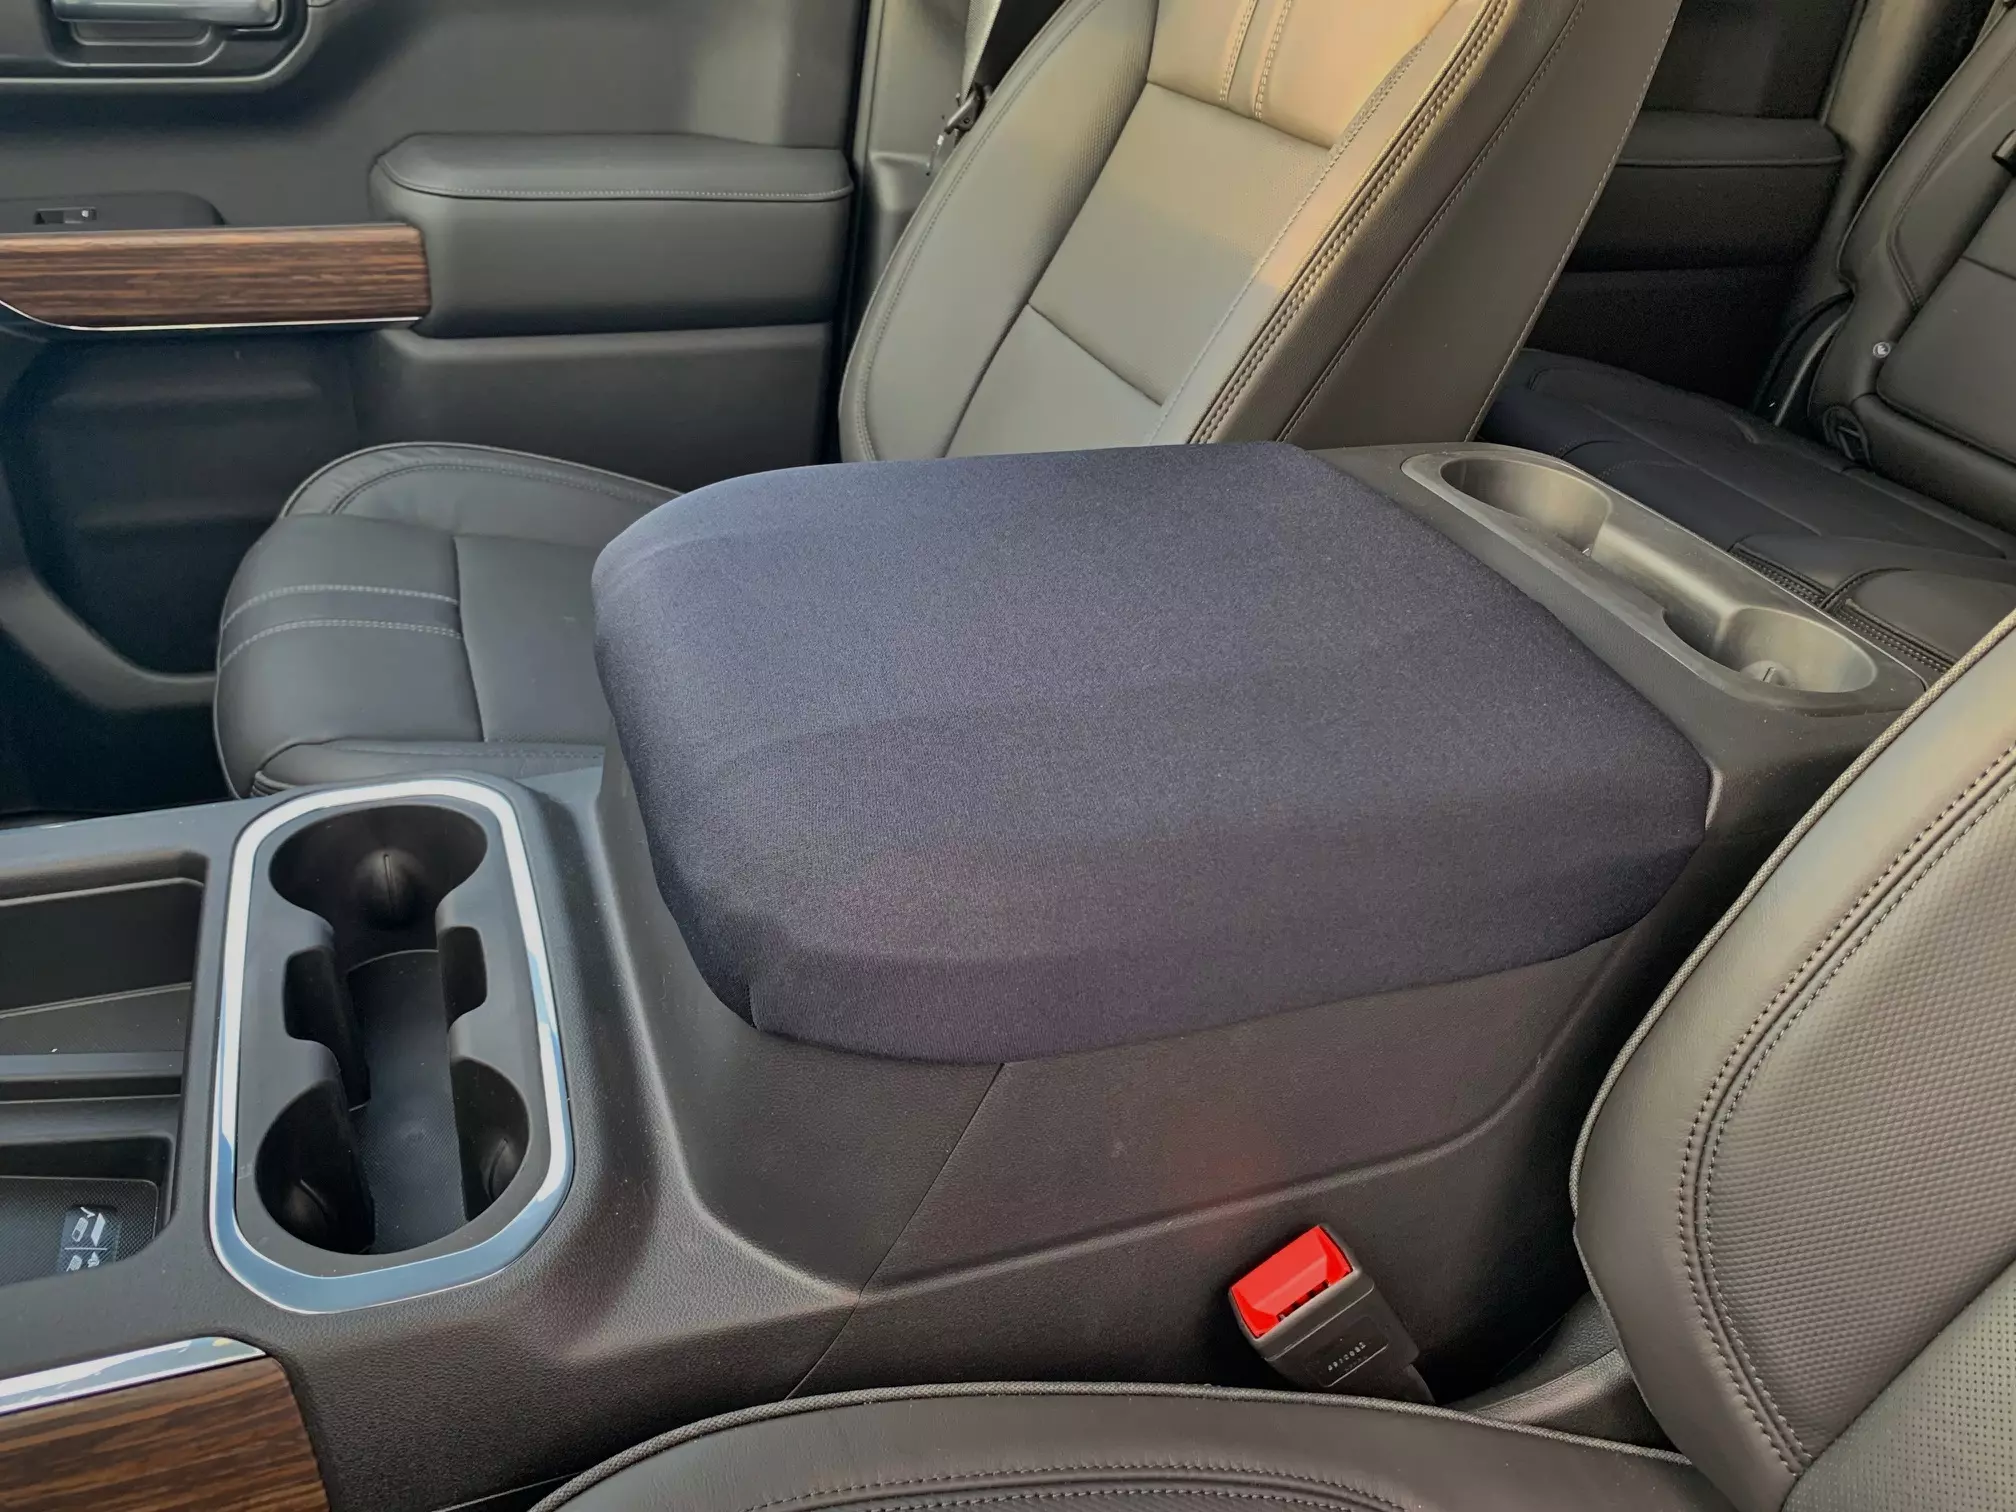 Buy Neoprene Center Console Armrest Cover Fits the Chevy Tahoe 2021-2023